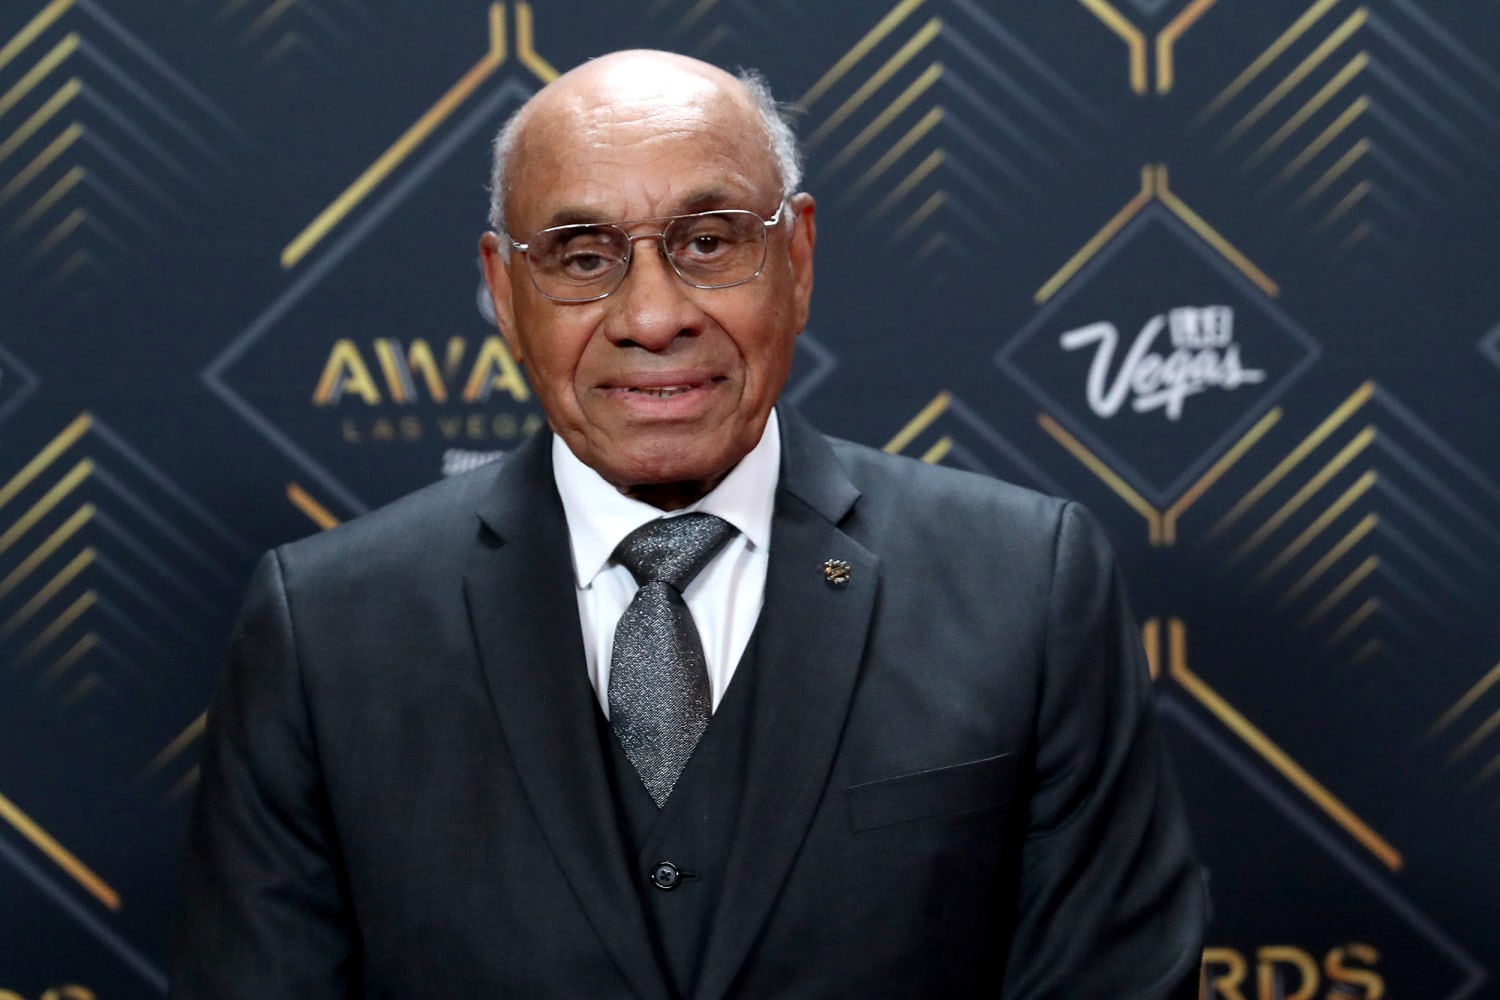 Boston Bruins retire jersey of Willie O'Ree, NHL's first black